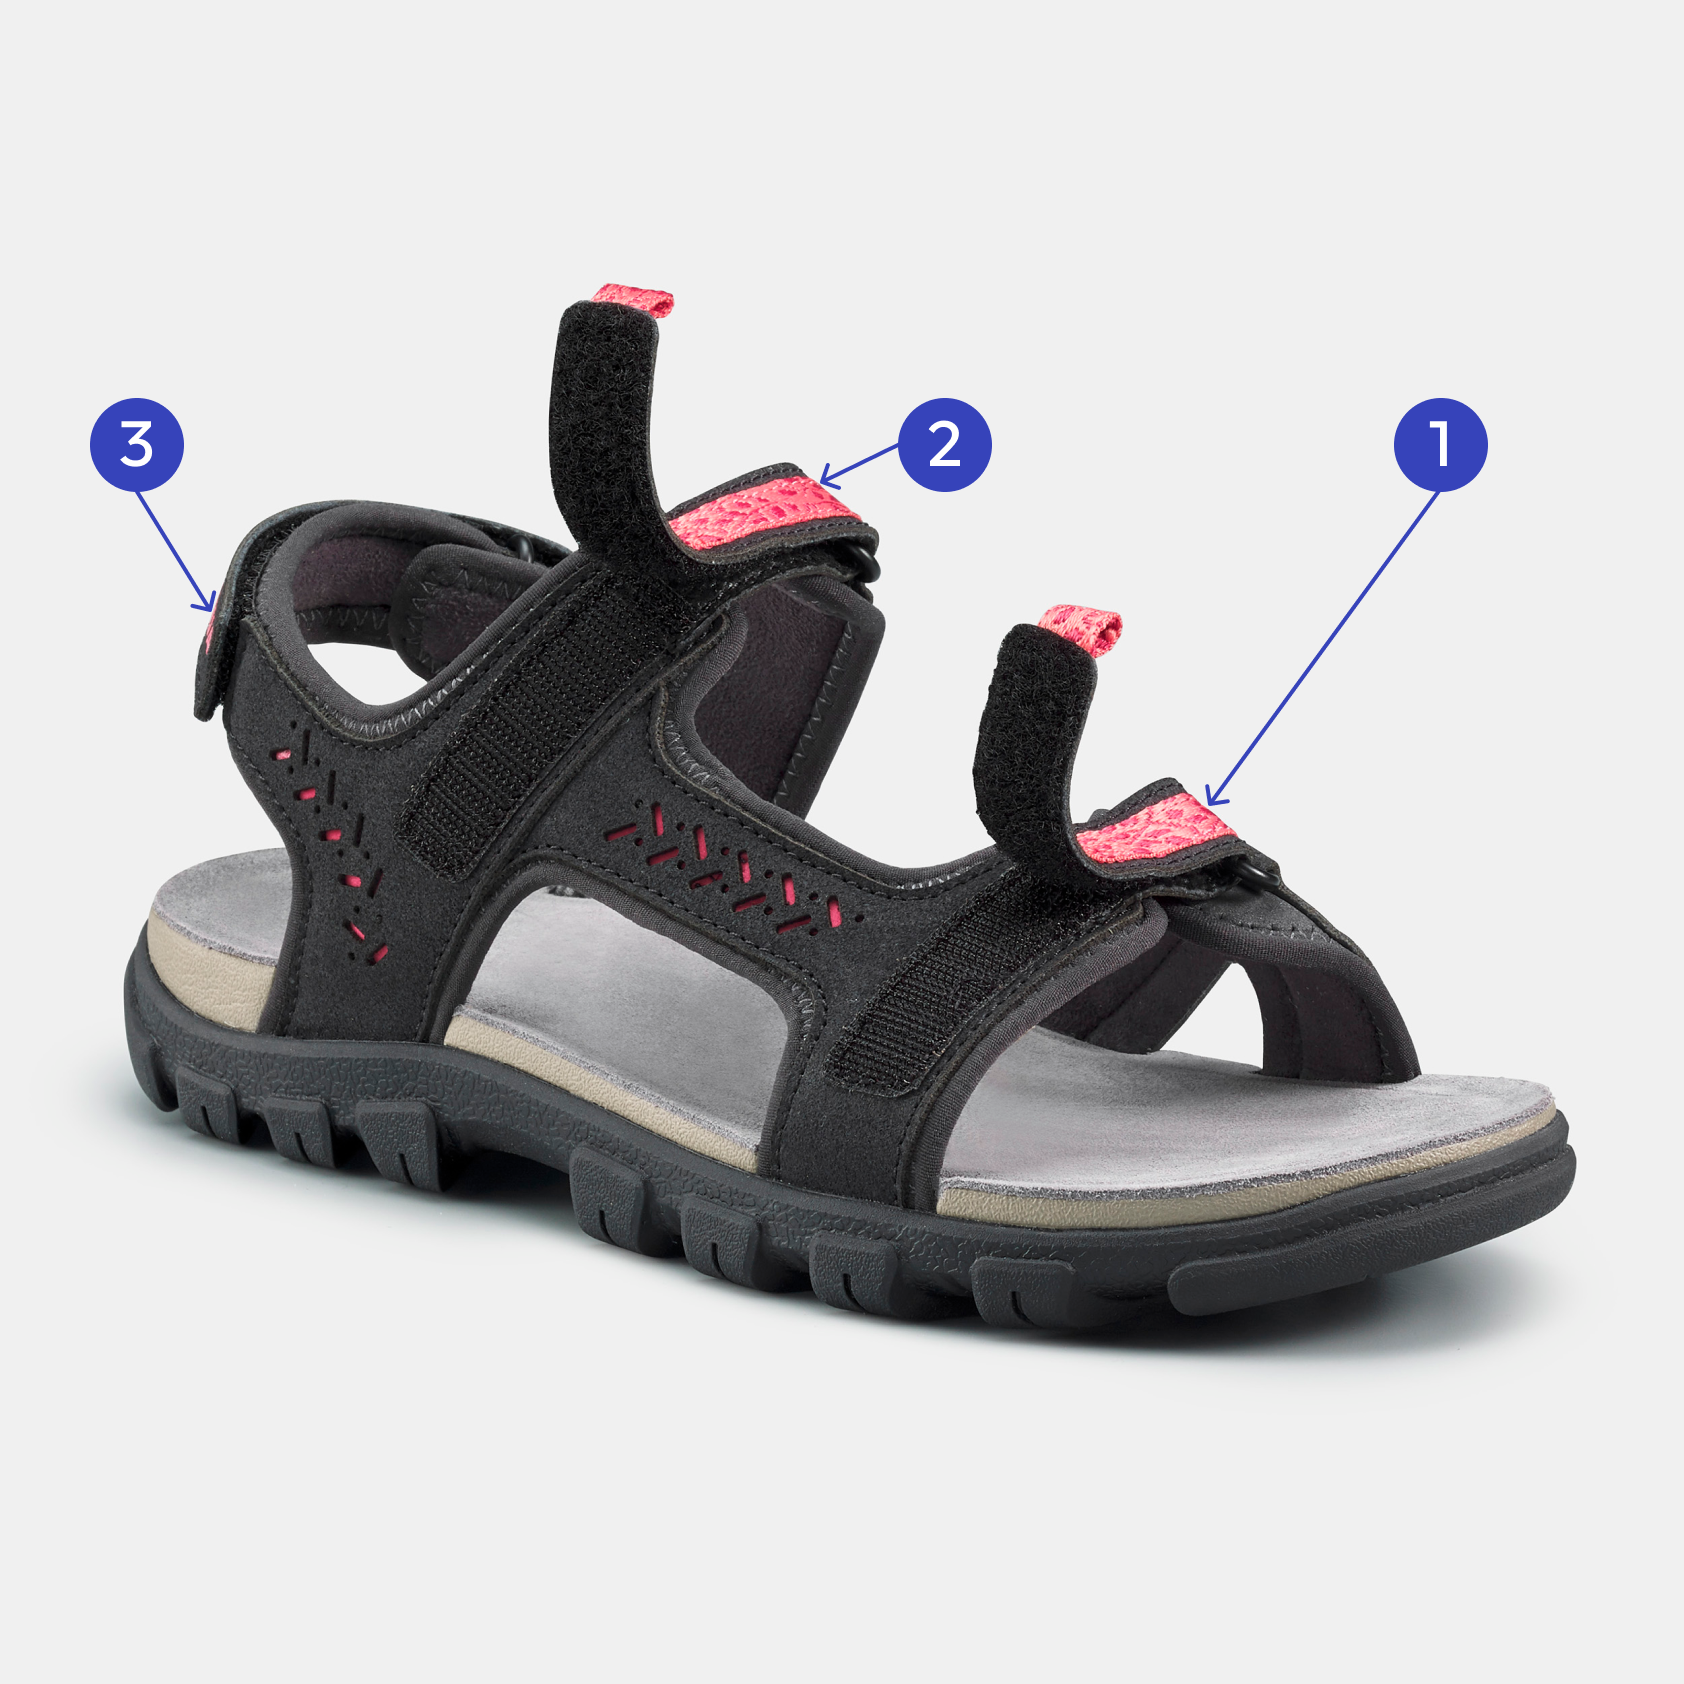 Choosing hiking sandals for women with sensitive feet